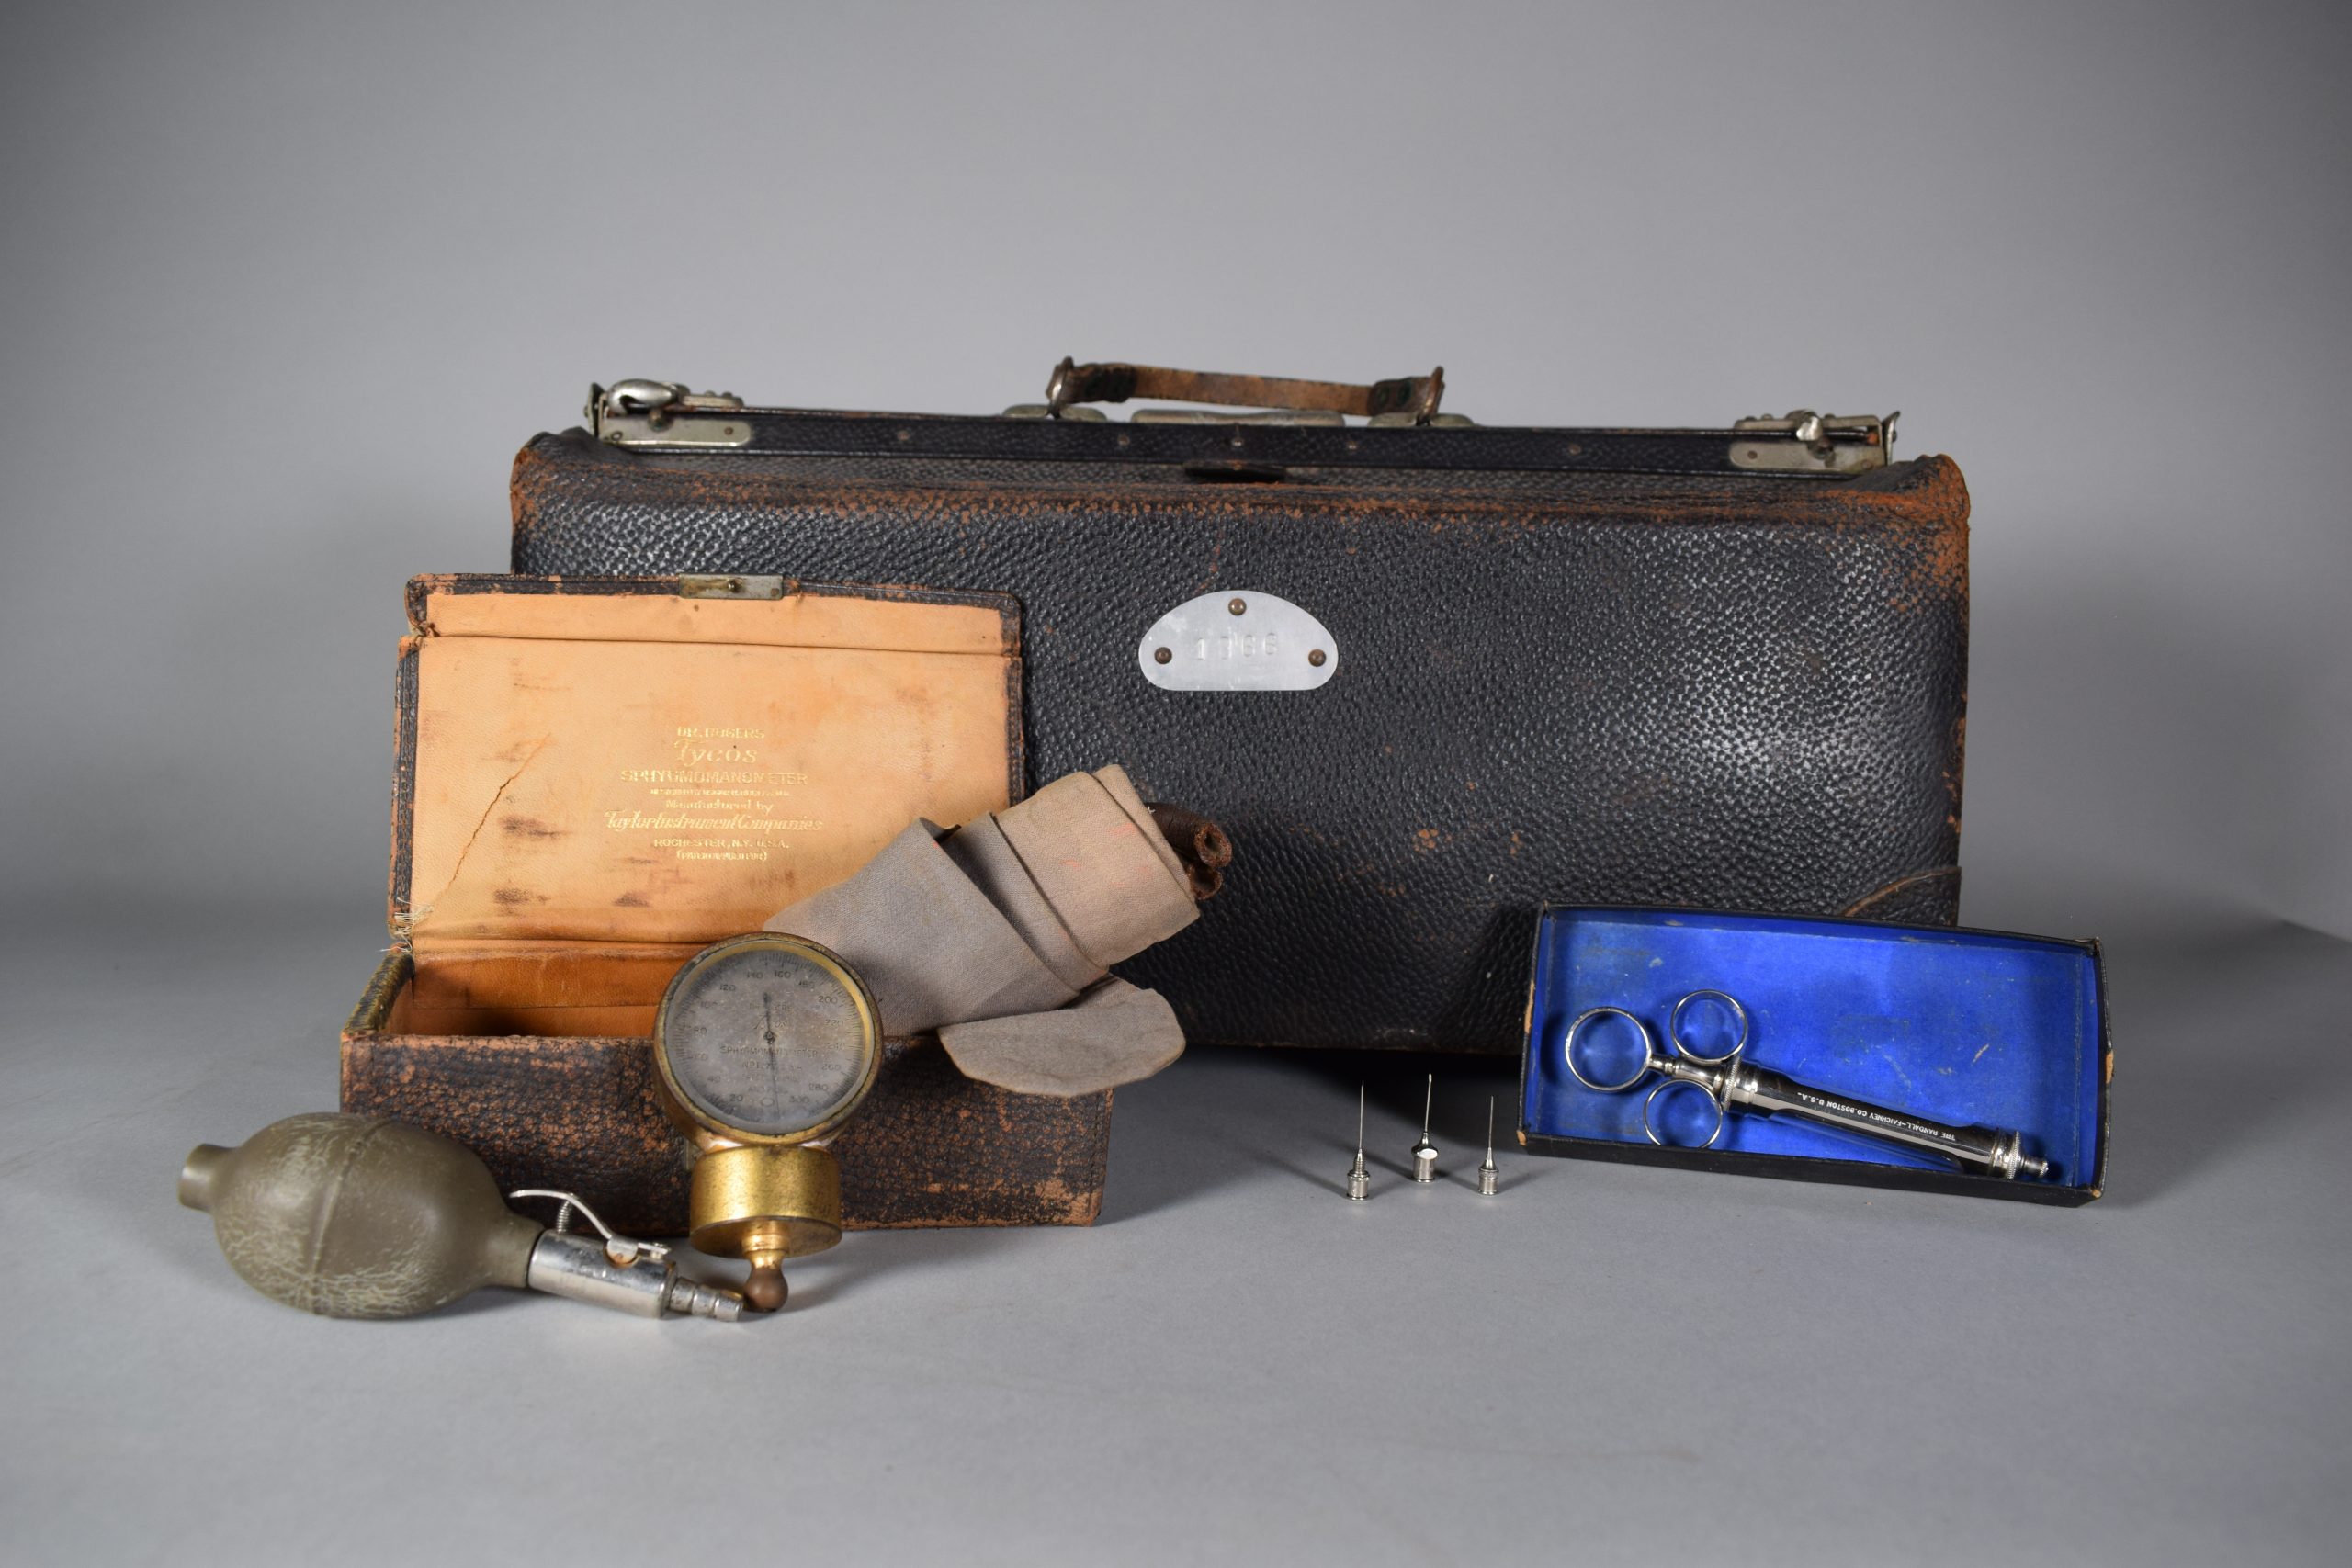 Colour photograph of a doctor’s bag and instruments. At the back there is a large rectangular black leather bag with a handle in the centre and clasps on both sides. The bag is slightly damaged at the corners. In front of the bag and to the left is a smaller case, also made of black leather. It is open, showing a beige interior. The case contains a large beige-grey cotton bandage. A blood pressure bulb and a gold-coloured sphygmomanometer lean against the case. To the right, there is an old syringe in a cardboard box and three needles can be seen to its left.